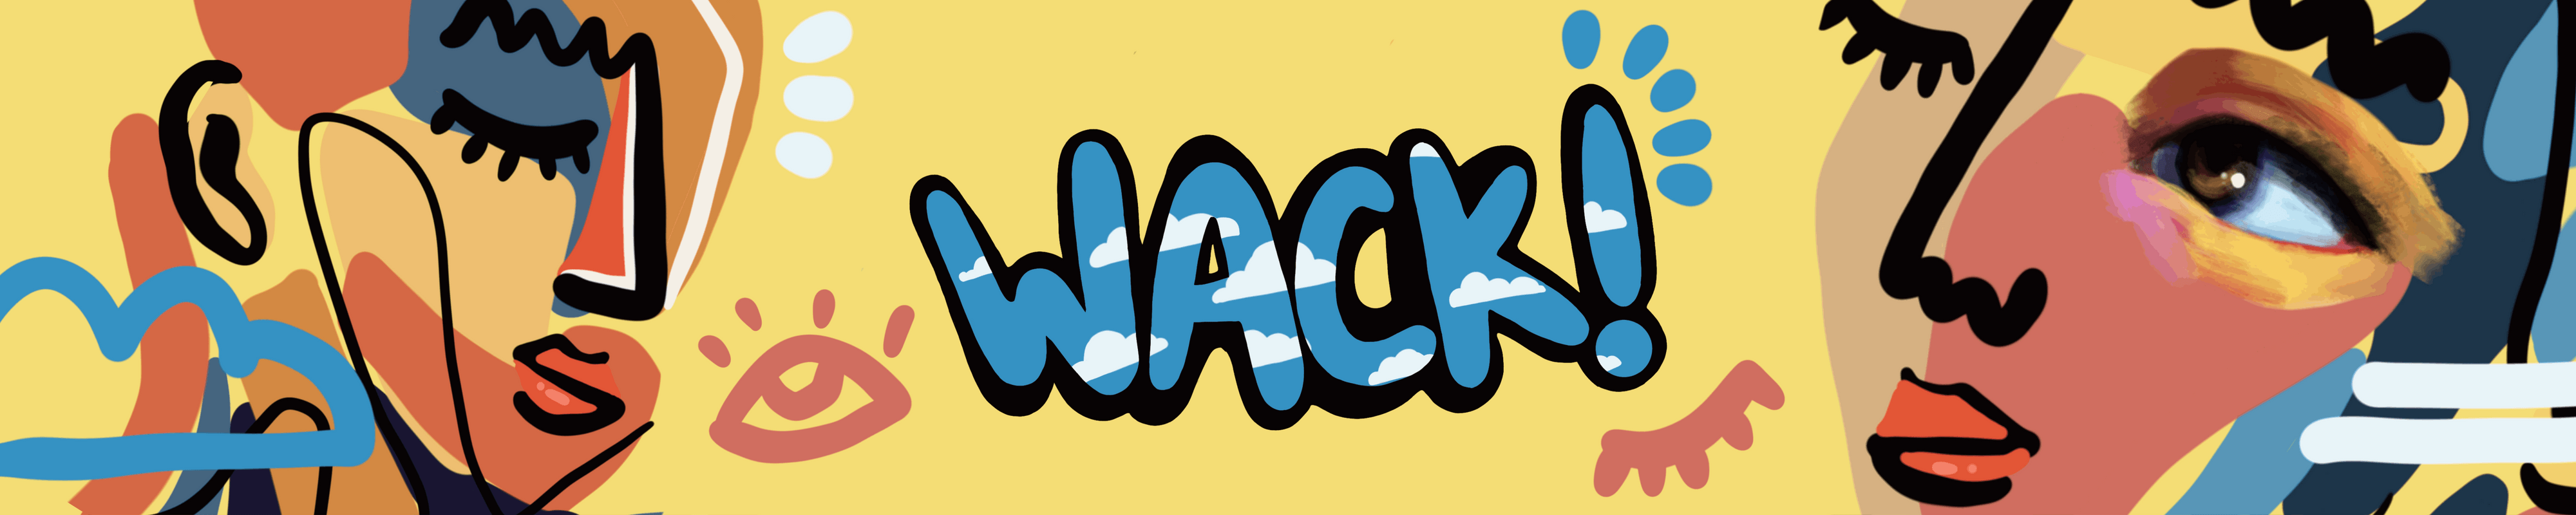 WACK! - by Camille Chiang